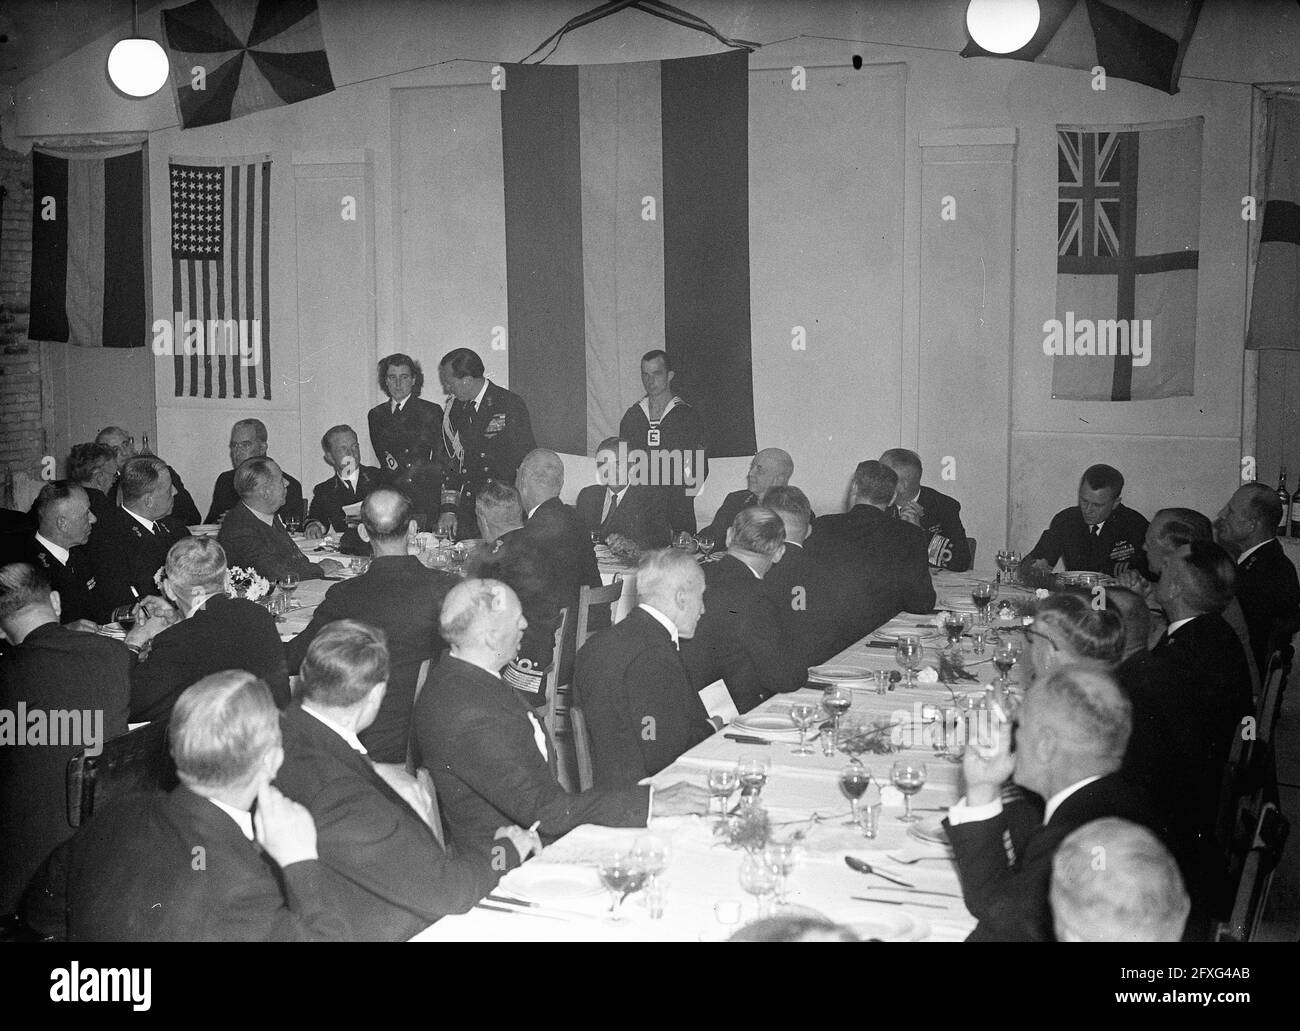 Forty-year jubilee Submarine Service... Dinner officers reunites. Overview, June 18, 1947, anniversaries, meals, Navy, The Netherlands, 20th century press agency photo, news to remember, documentary, historic photography 1945-1990, visual stories, human history of the Twentieth Century, capturing moments in time Stock Photo